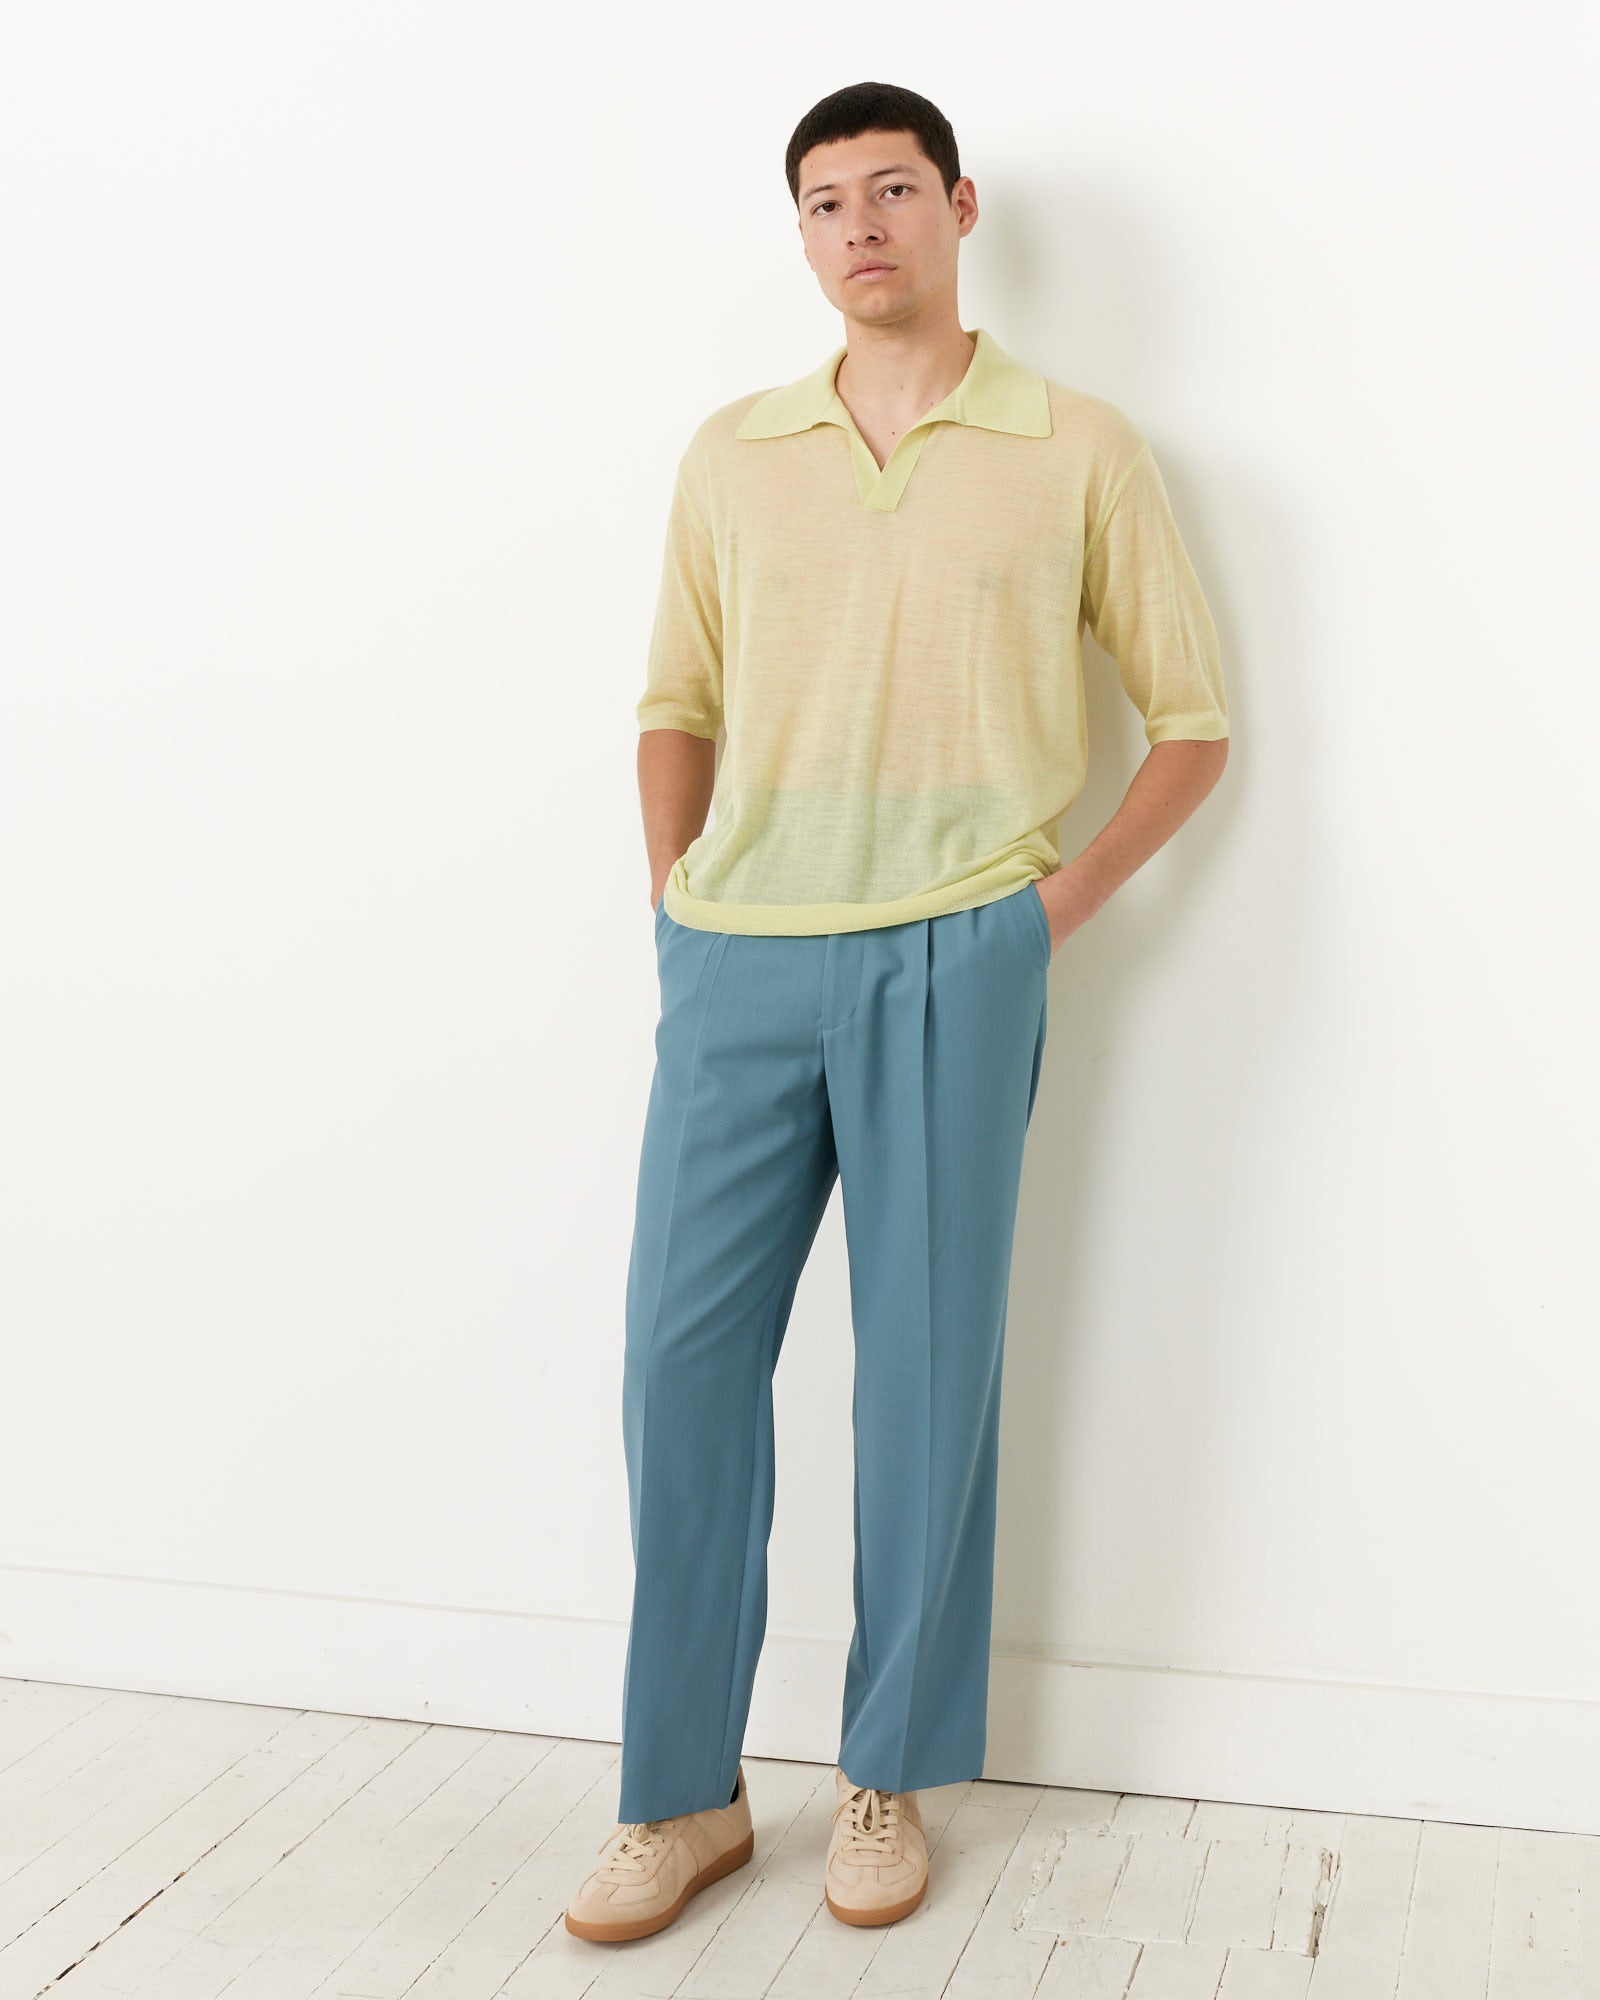 Silk Knit Skipper Polo in Lime Yellow